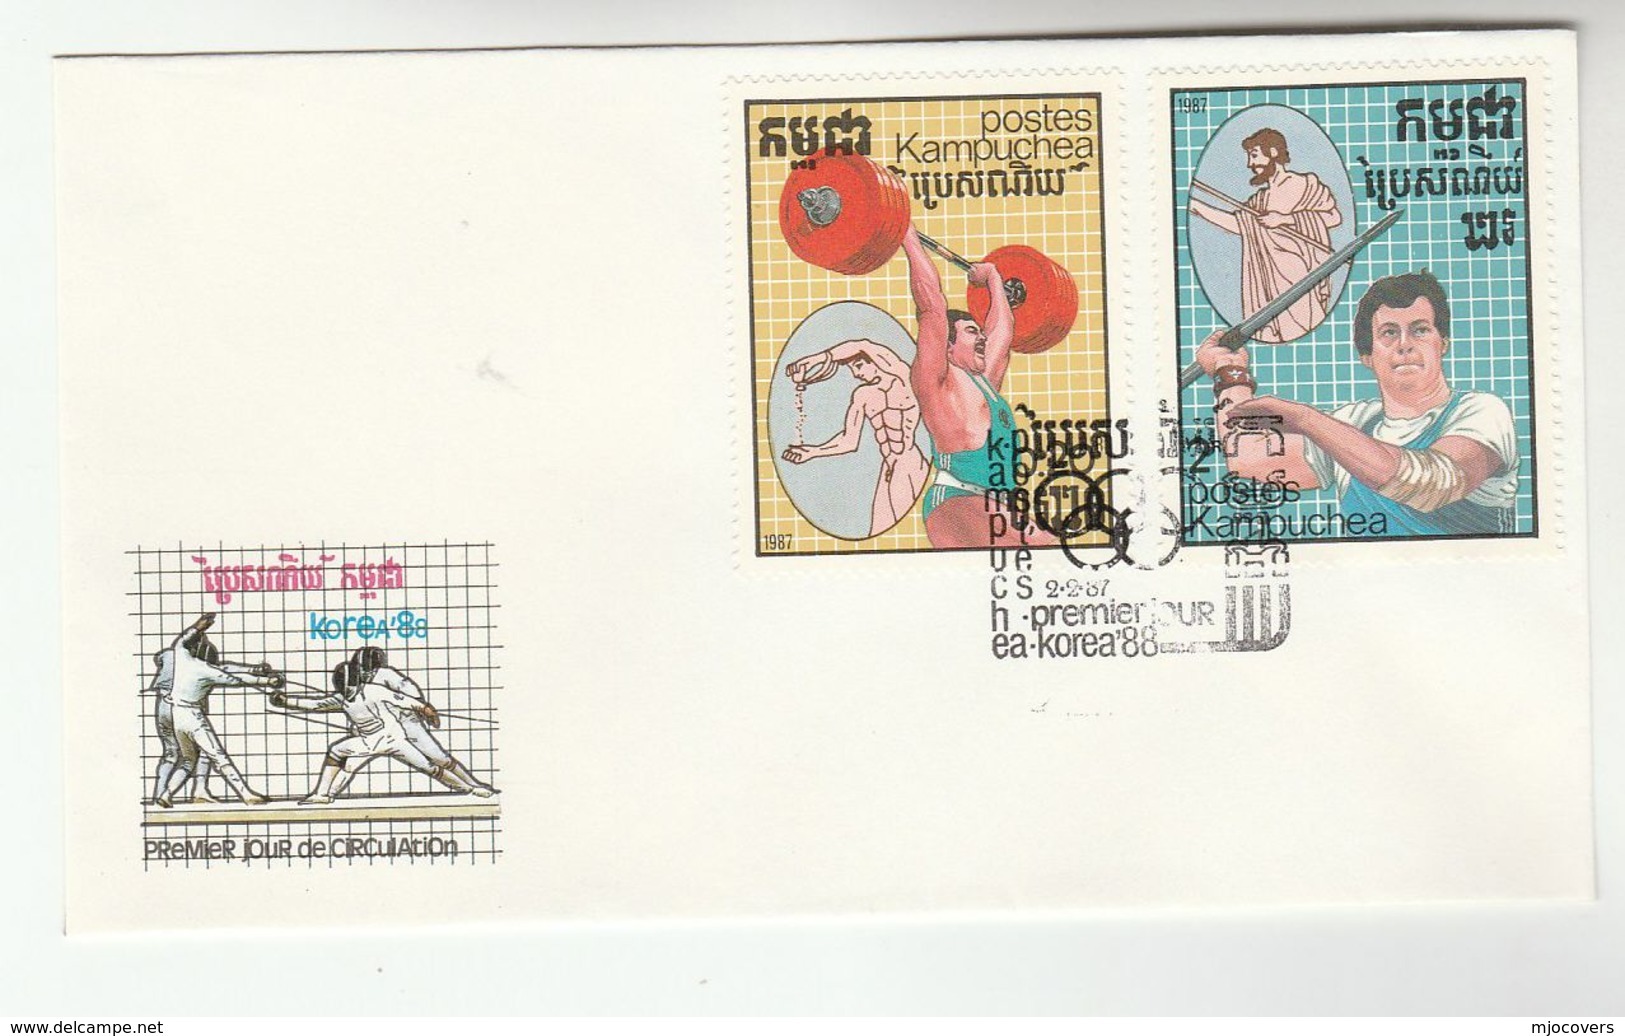 1988 KAMPUCHEA Cambodia FDC Stamps OLYMPICS WEIGHTLIFTING JAVELIN  Cover Nude Sport Olympic Games - Sommer 1988: Seoul